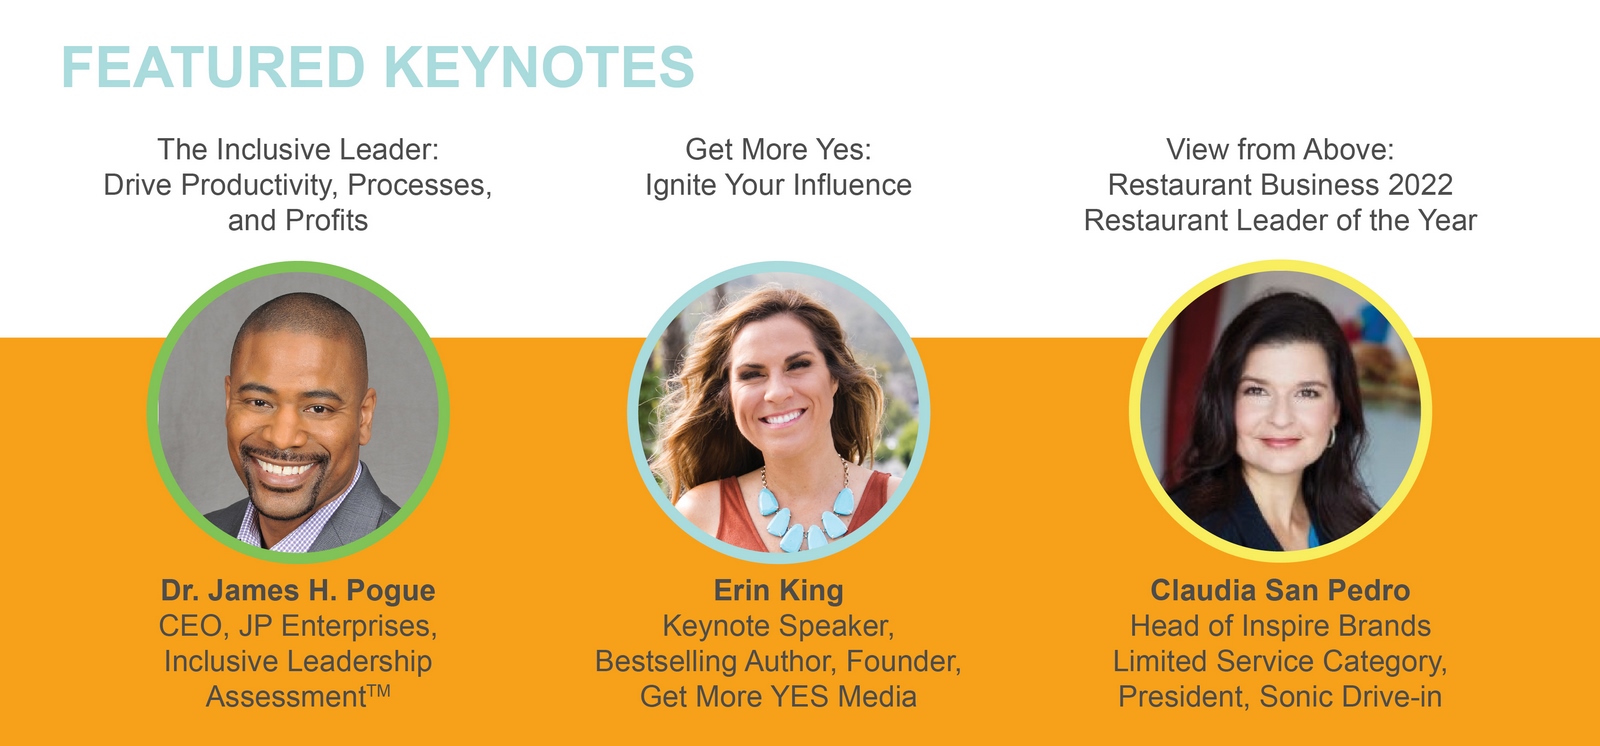 Featured Keynotes